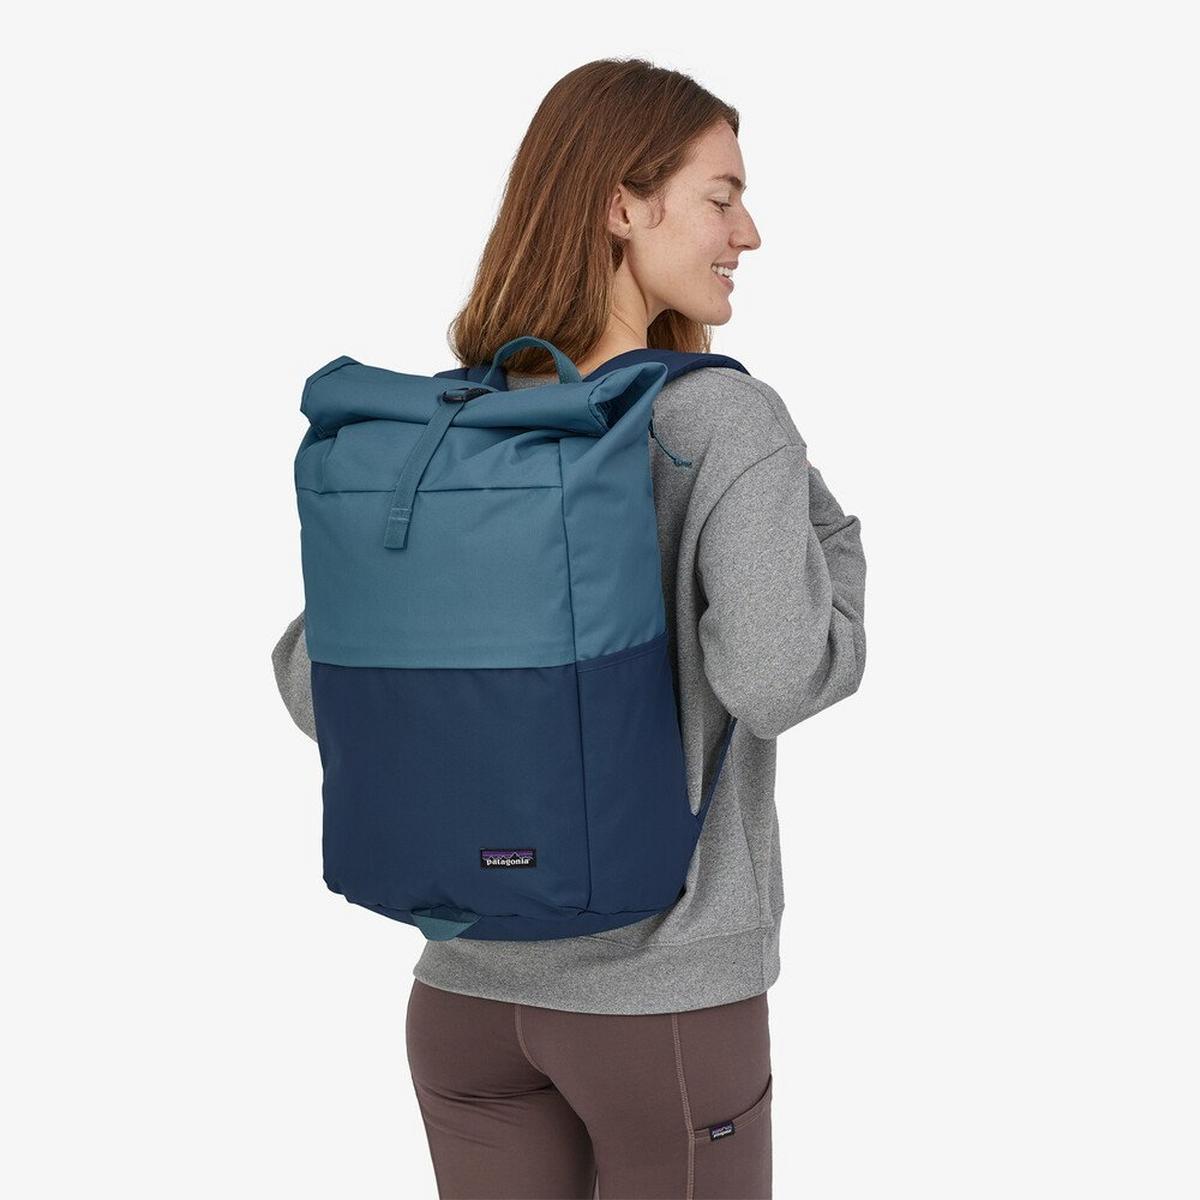 Patagonia Arbor Roll Top Pack - Abalone Blue